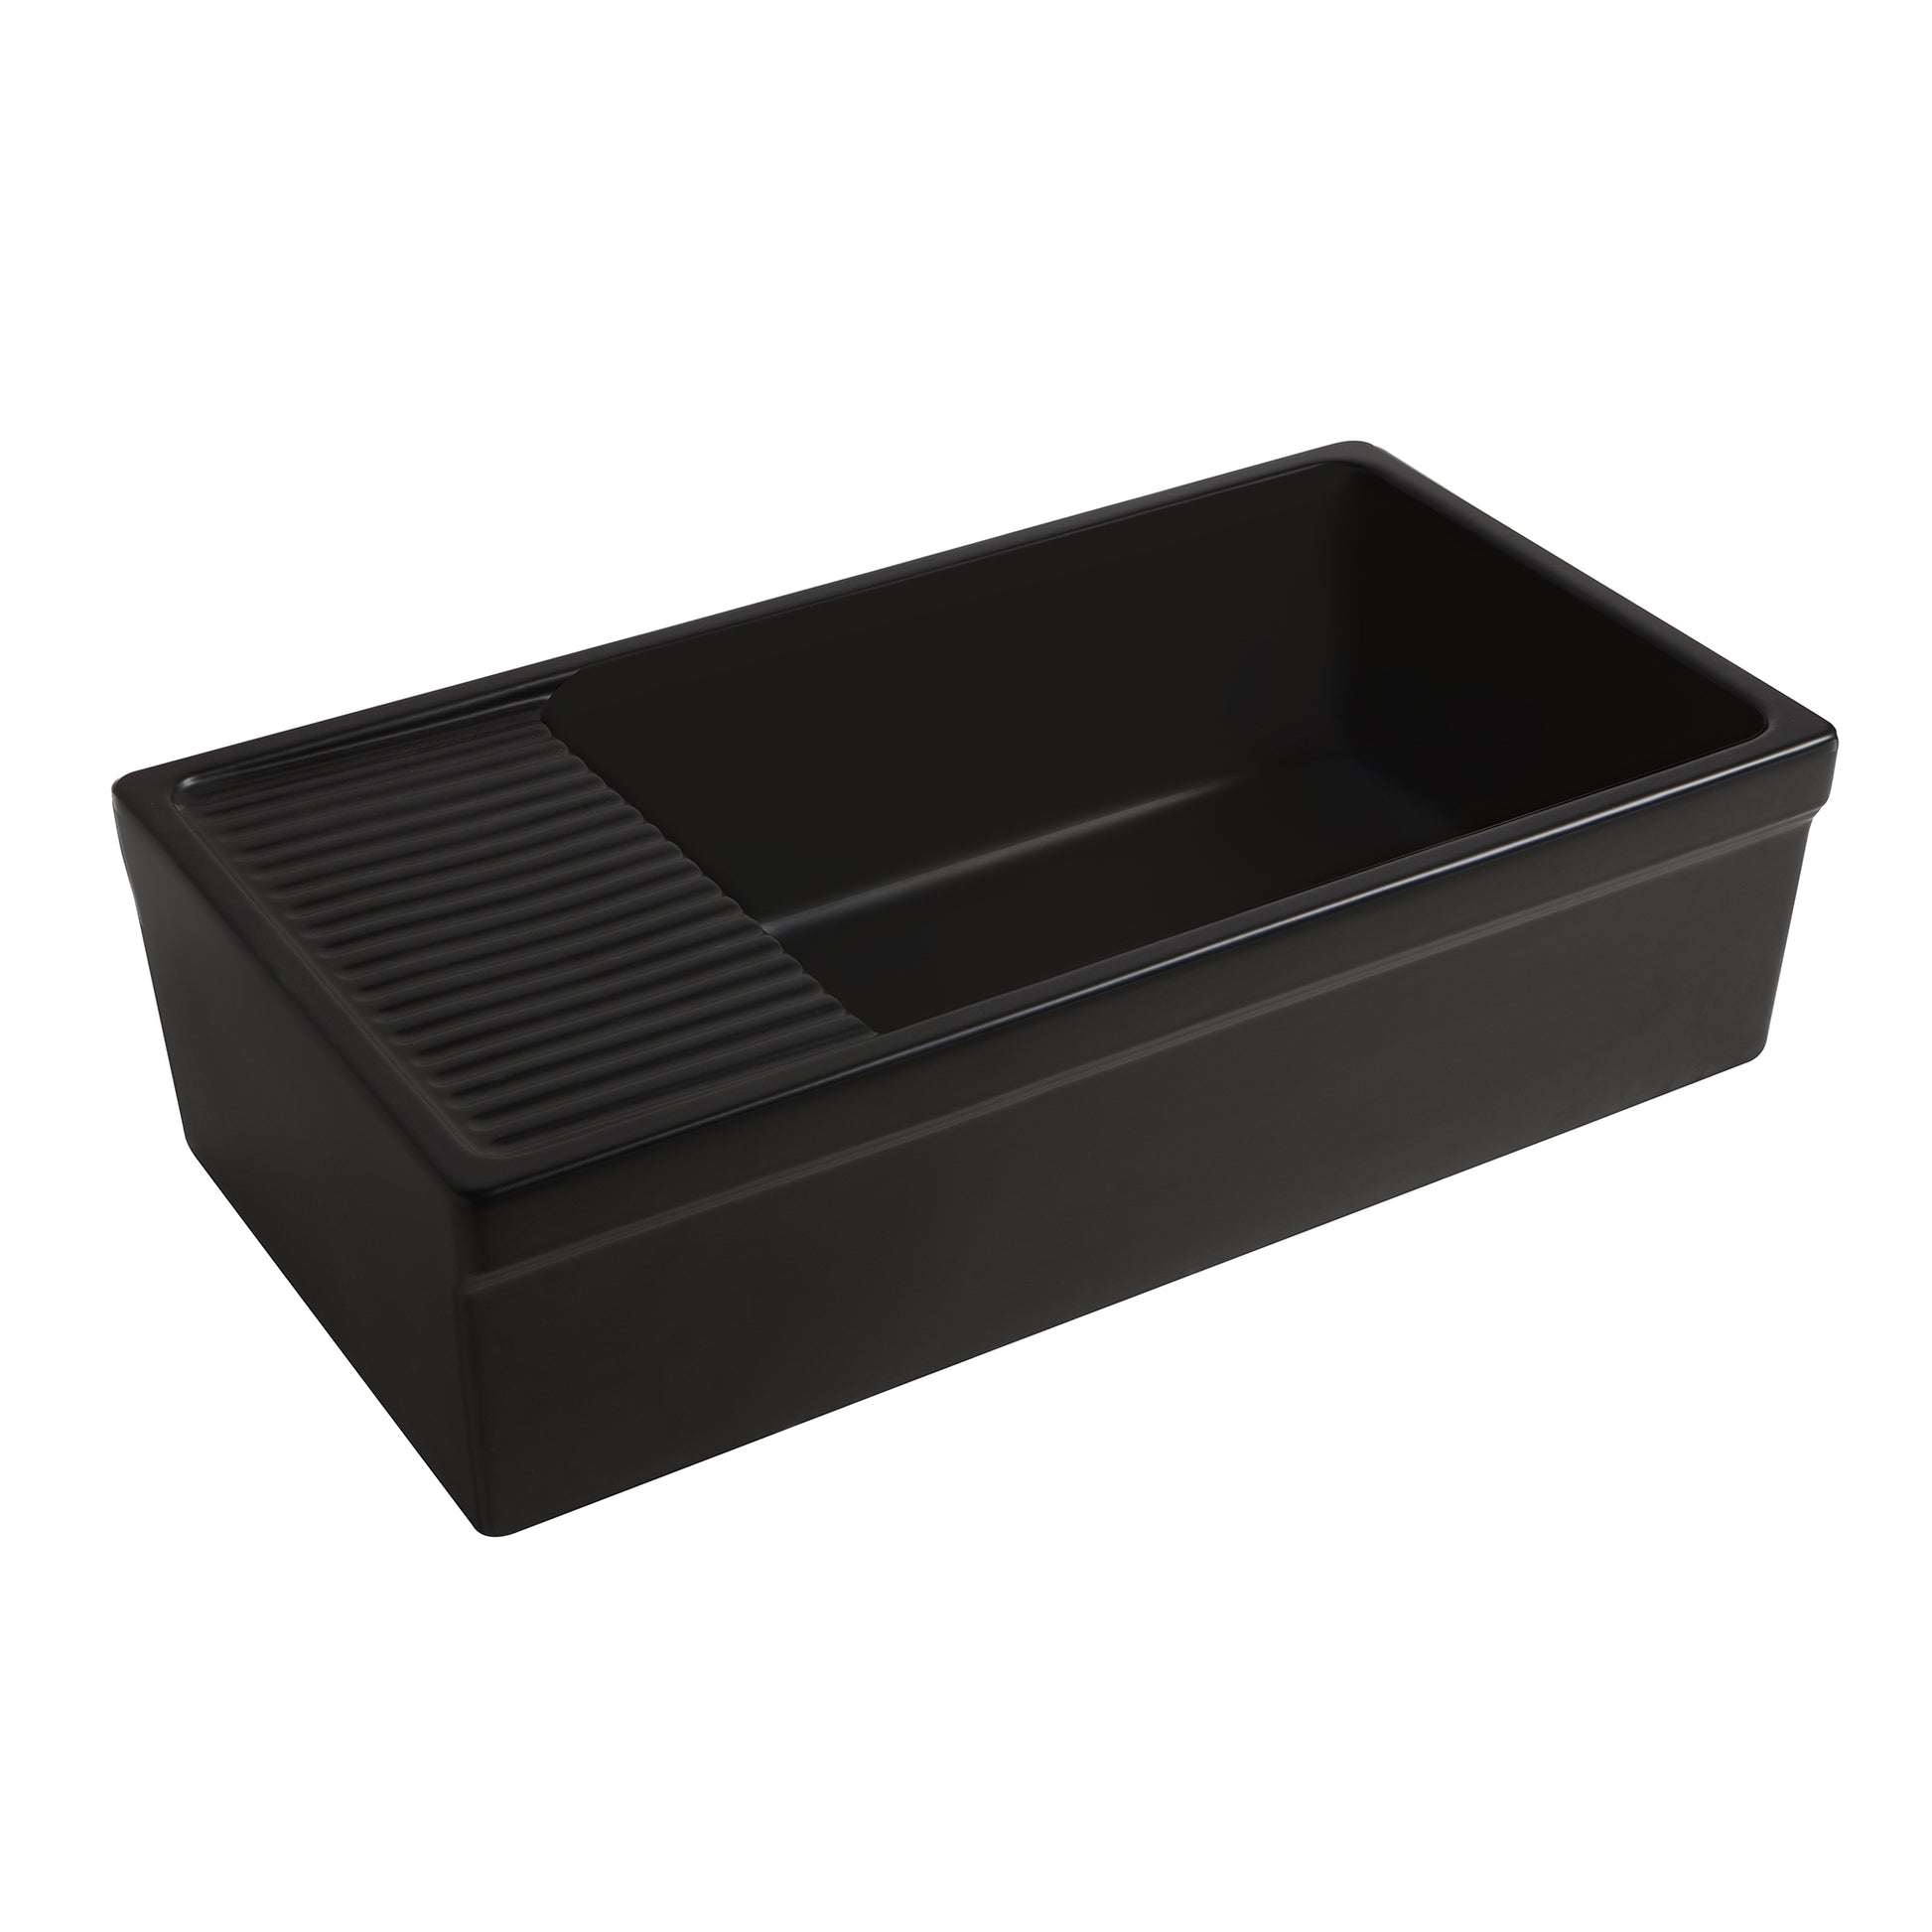 Farmhaus Large Matte Fireclay Kitchen Sink with Integral Drainboard and a 2 ½" Lip Front Apron on Both Sides